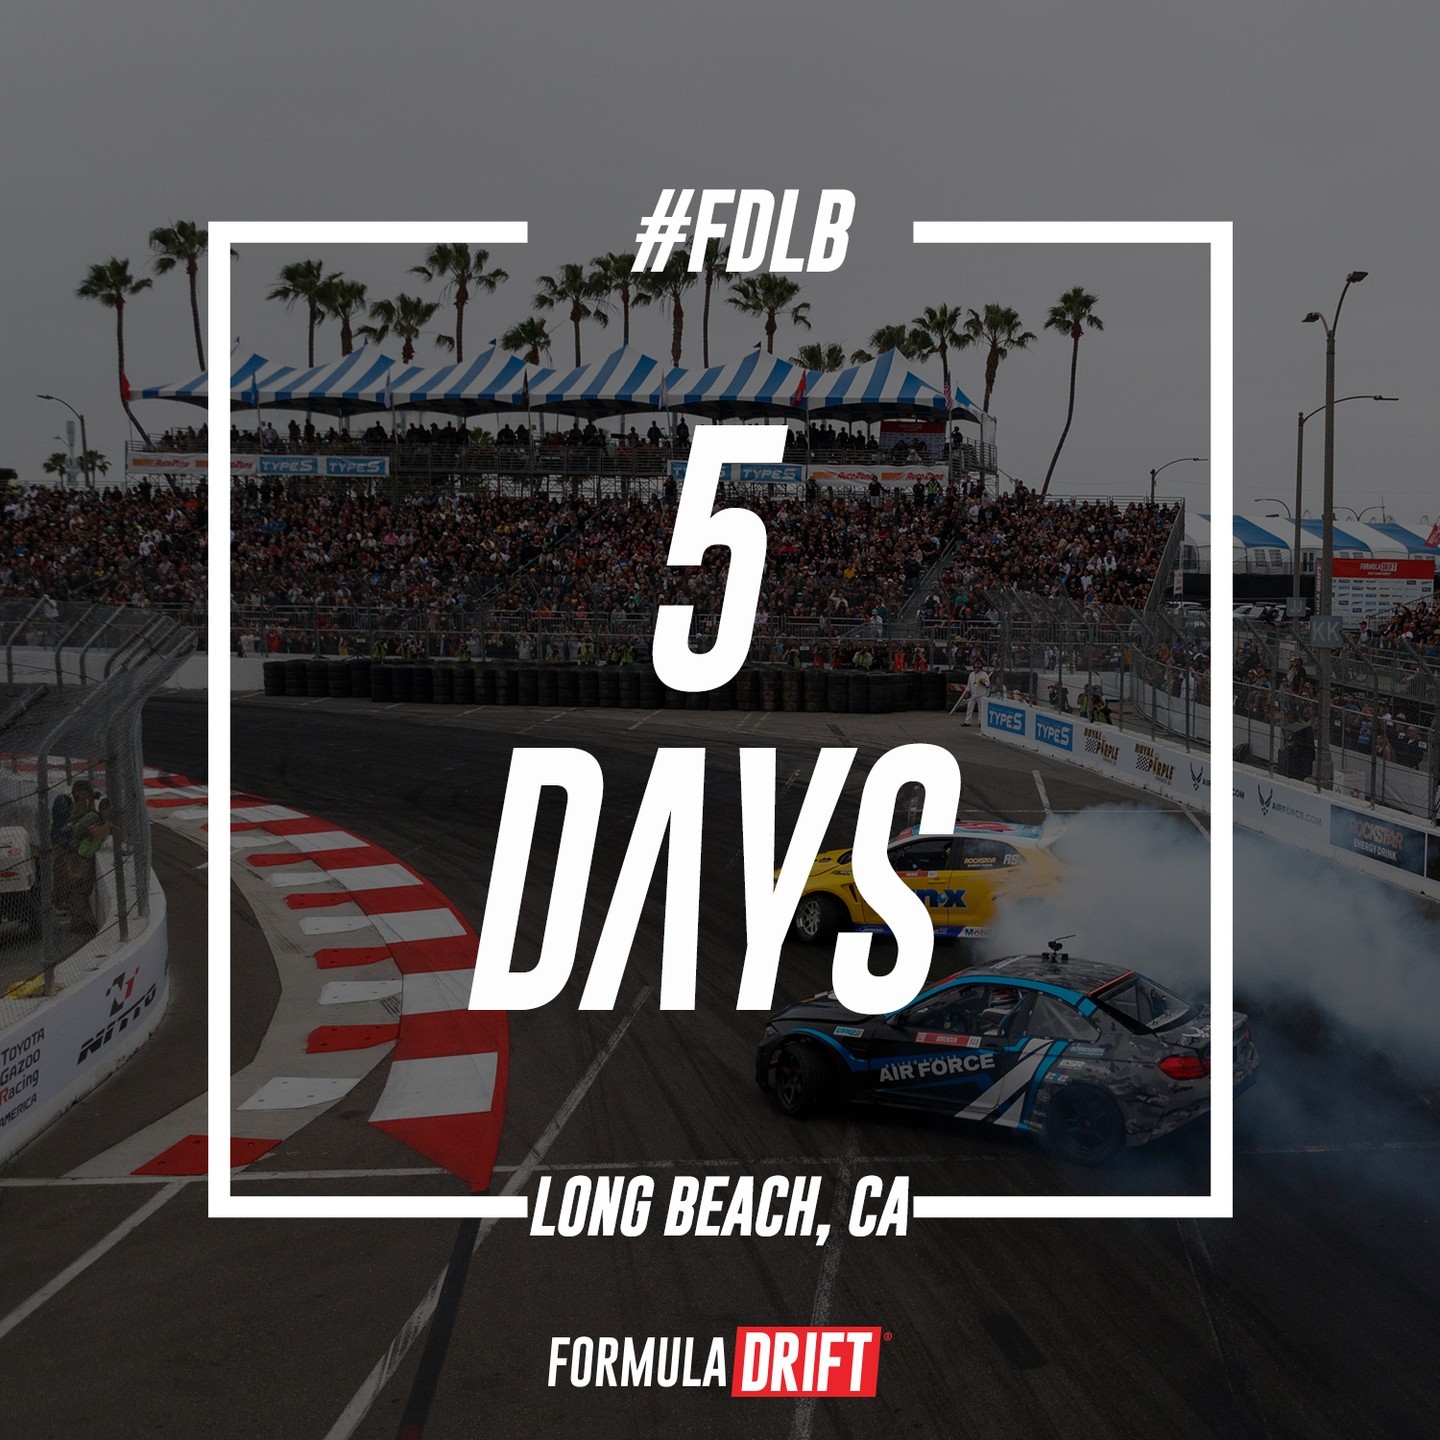 Cannot. Contain. Excitement. FIVE DAYS until drifting is back in Long Beach, California! 

Tickets available now to The @AutoZone Streets of Long Beach Presented by @TypeSAuto on April 07-08: (link in bio)